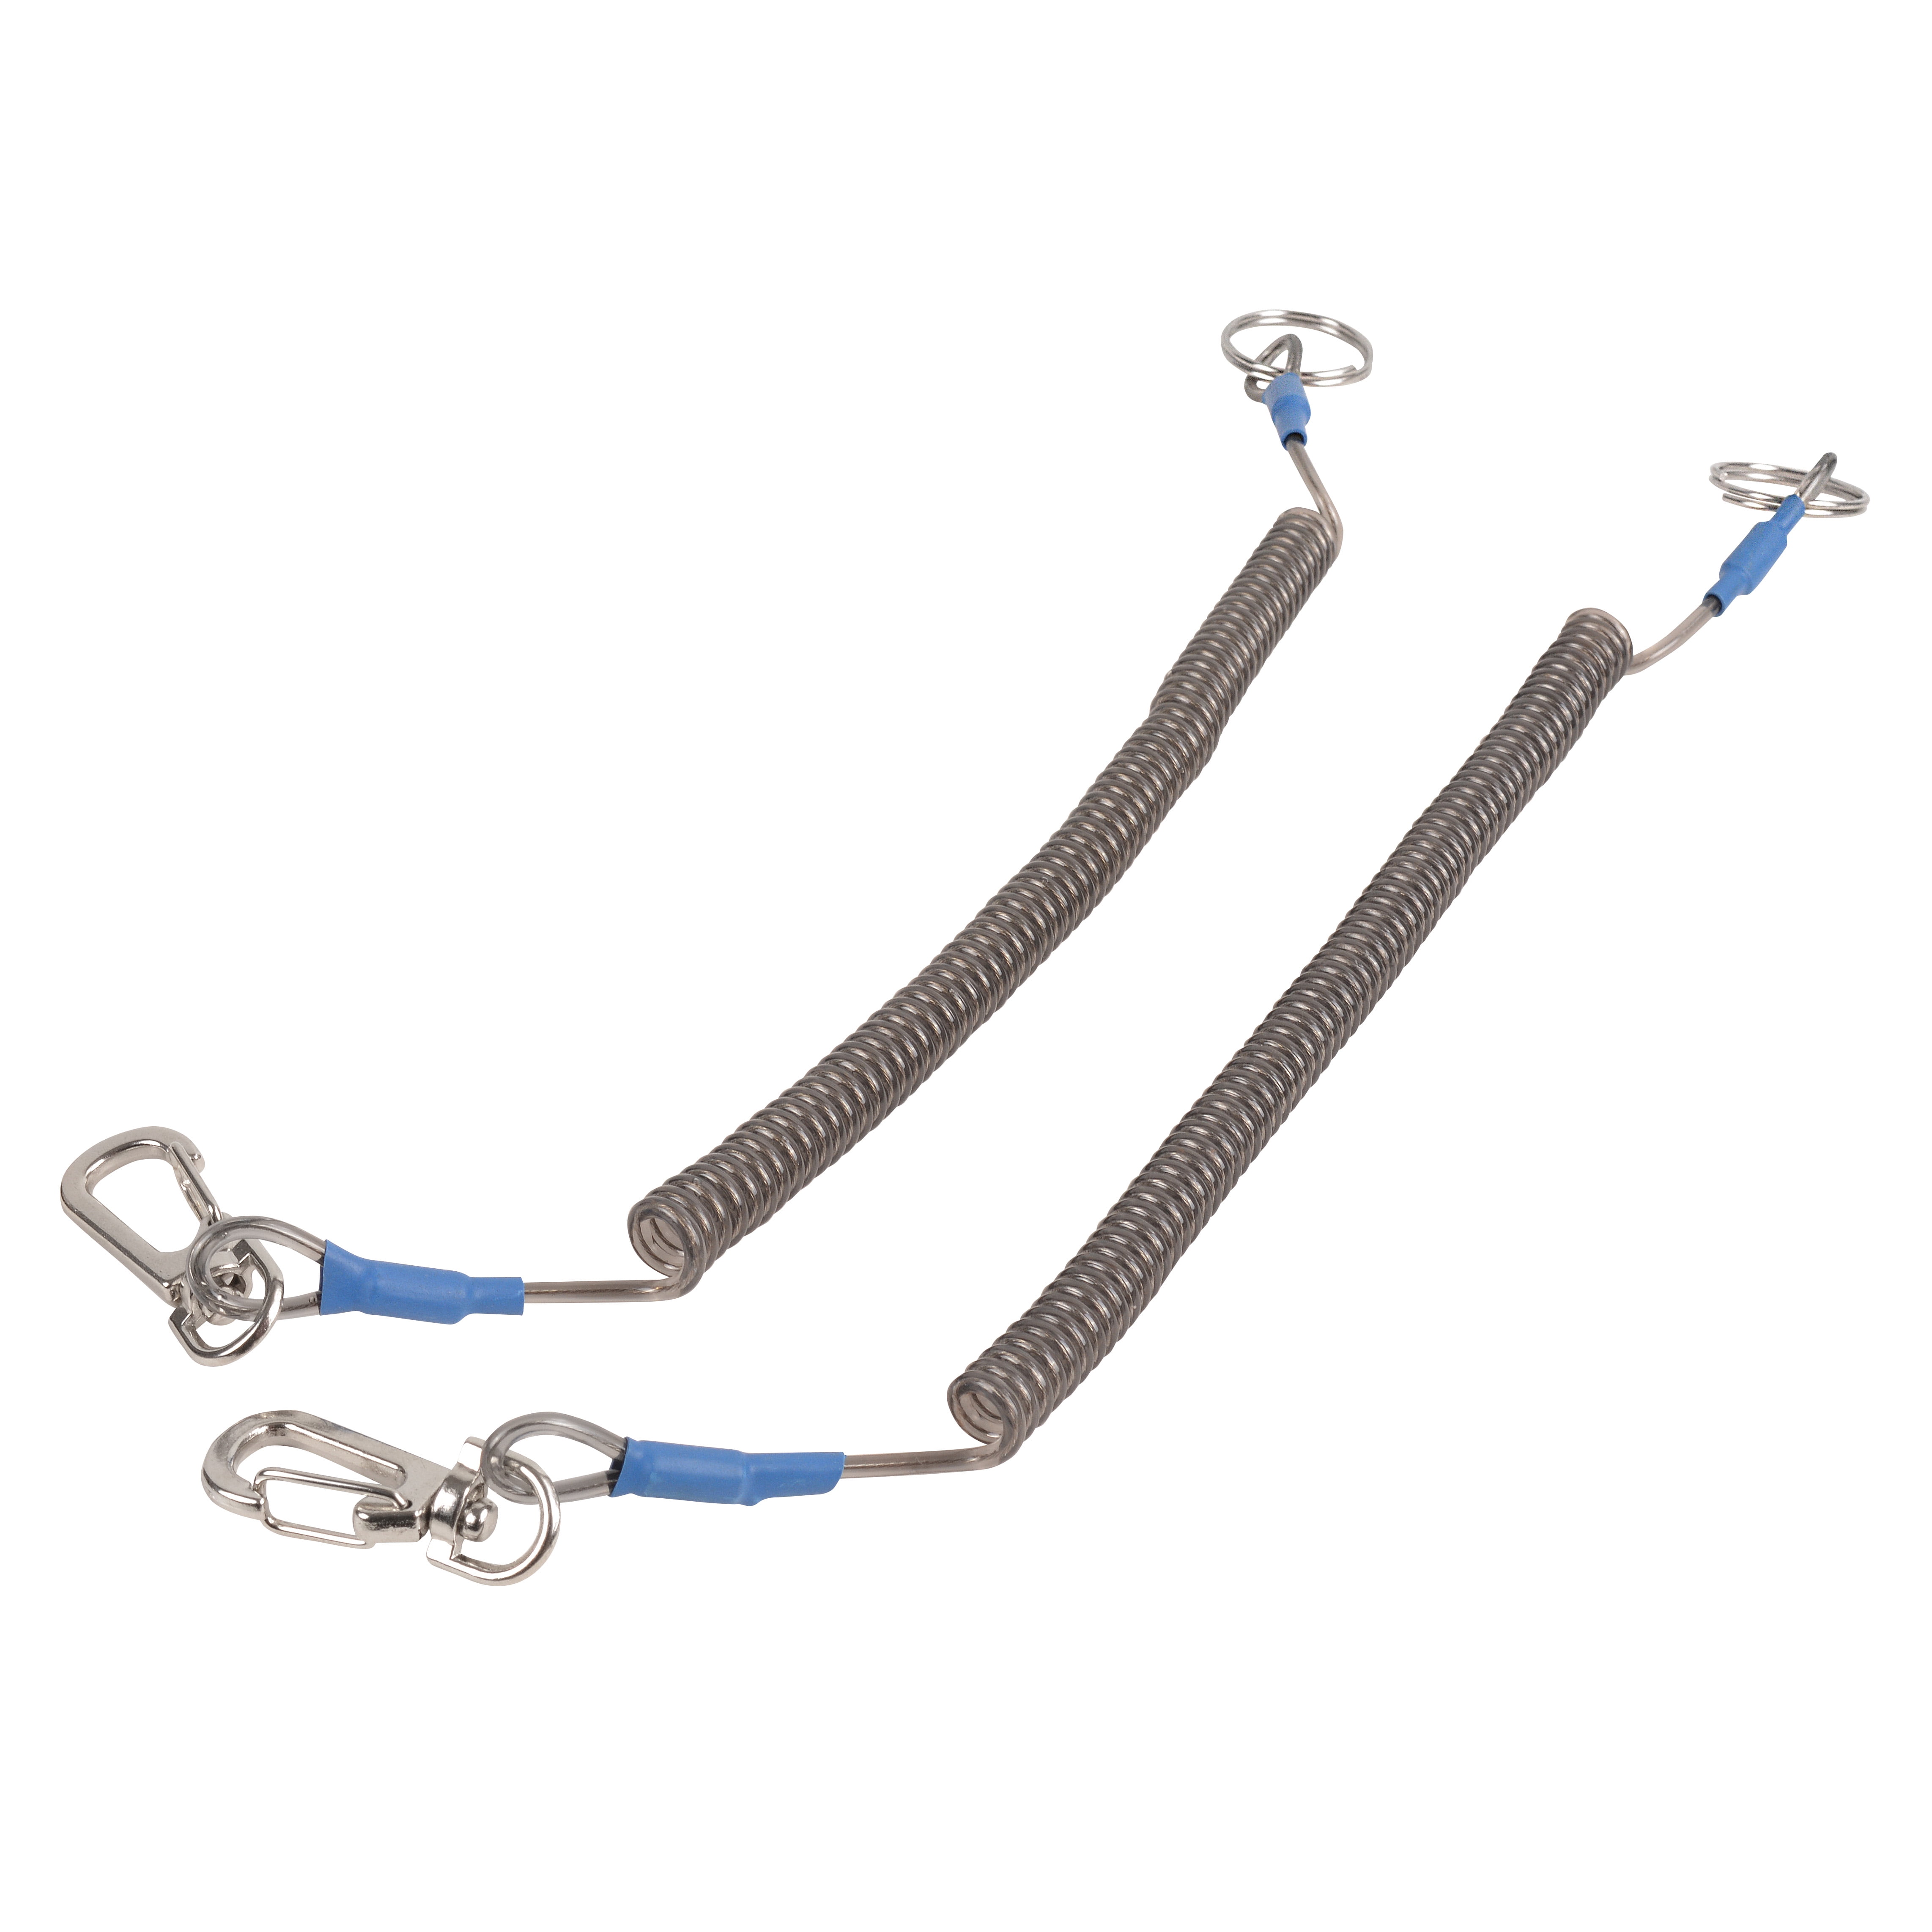 Cuda Universal Lanyard,10.25" for Fishing Pliers and Tools, 2-Pack